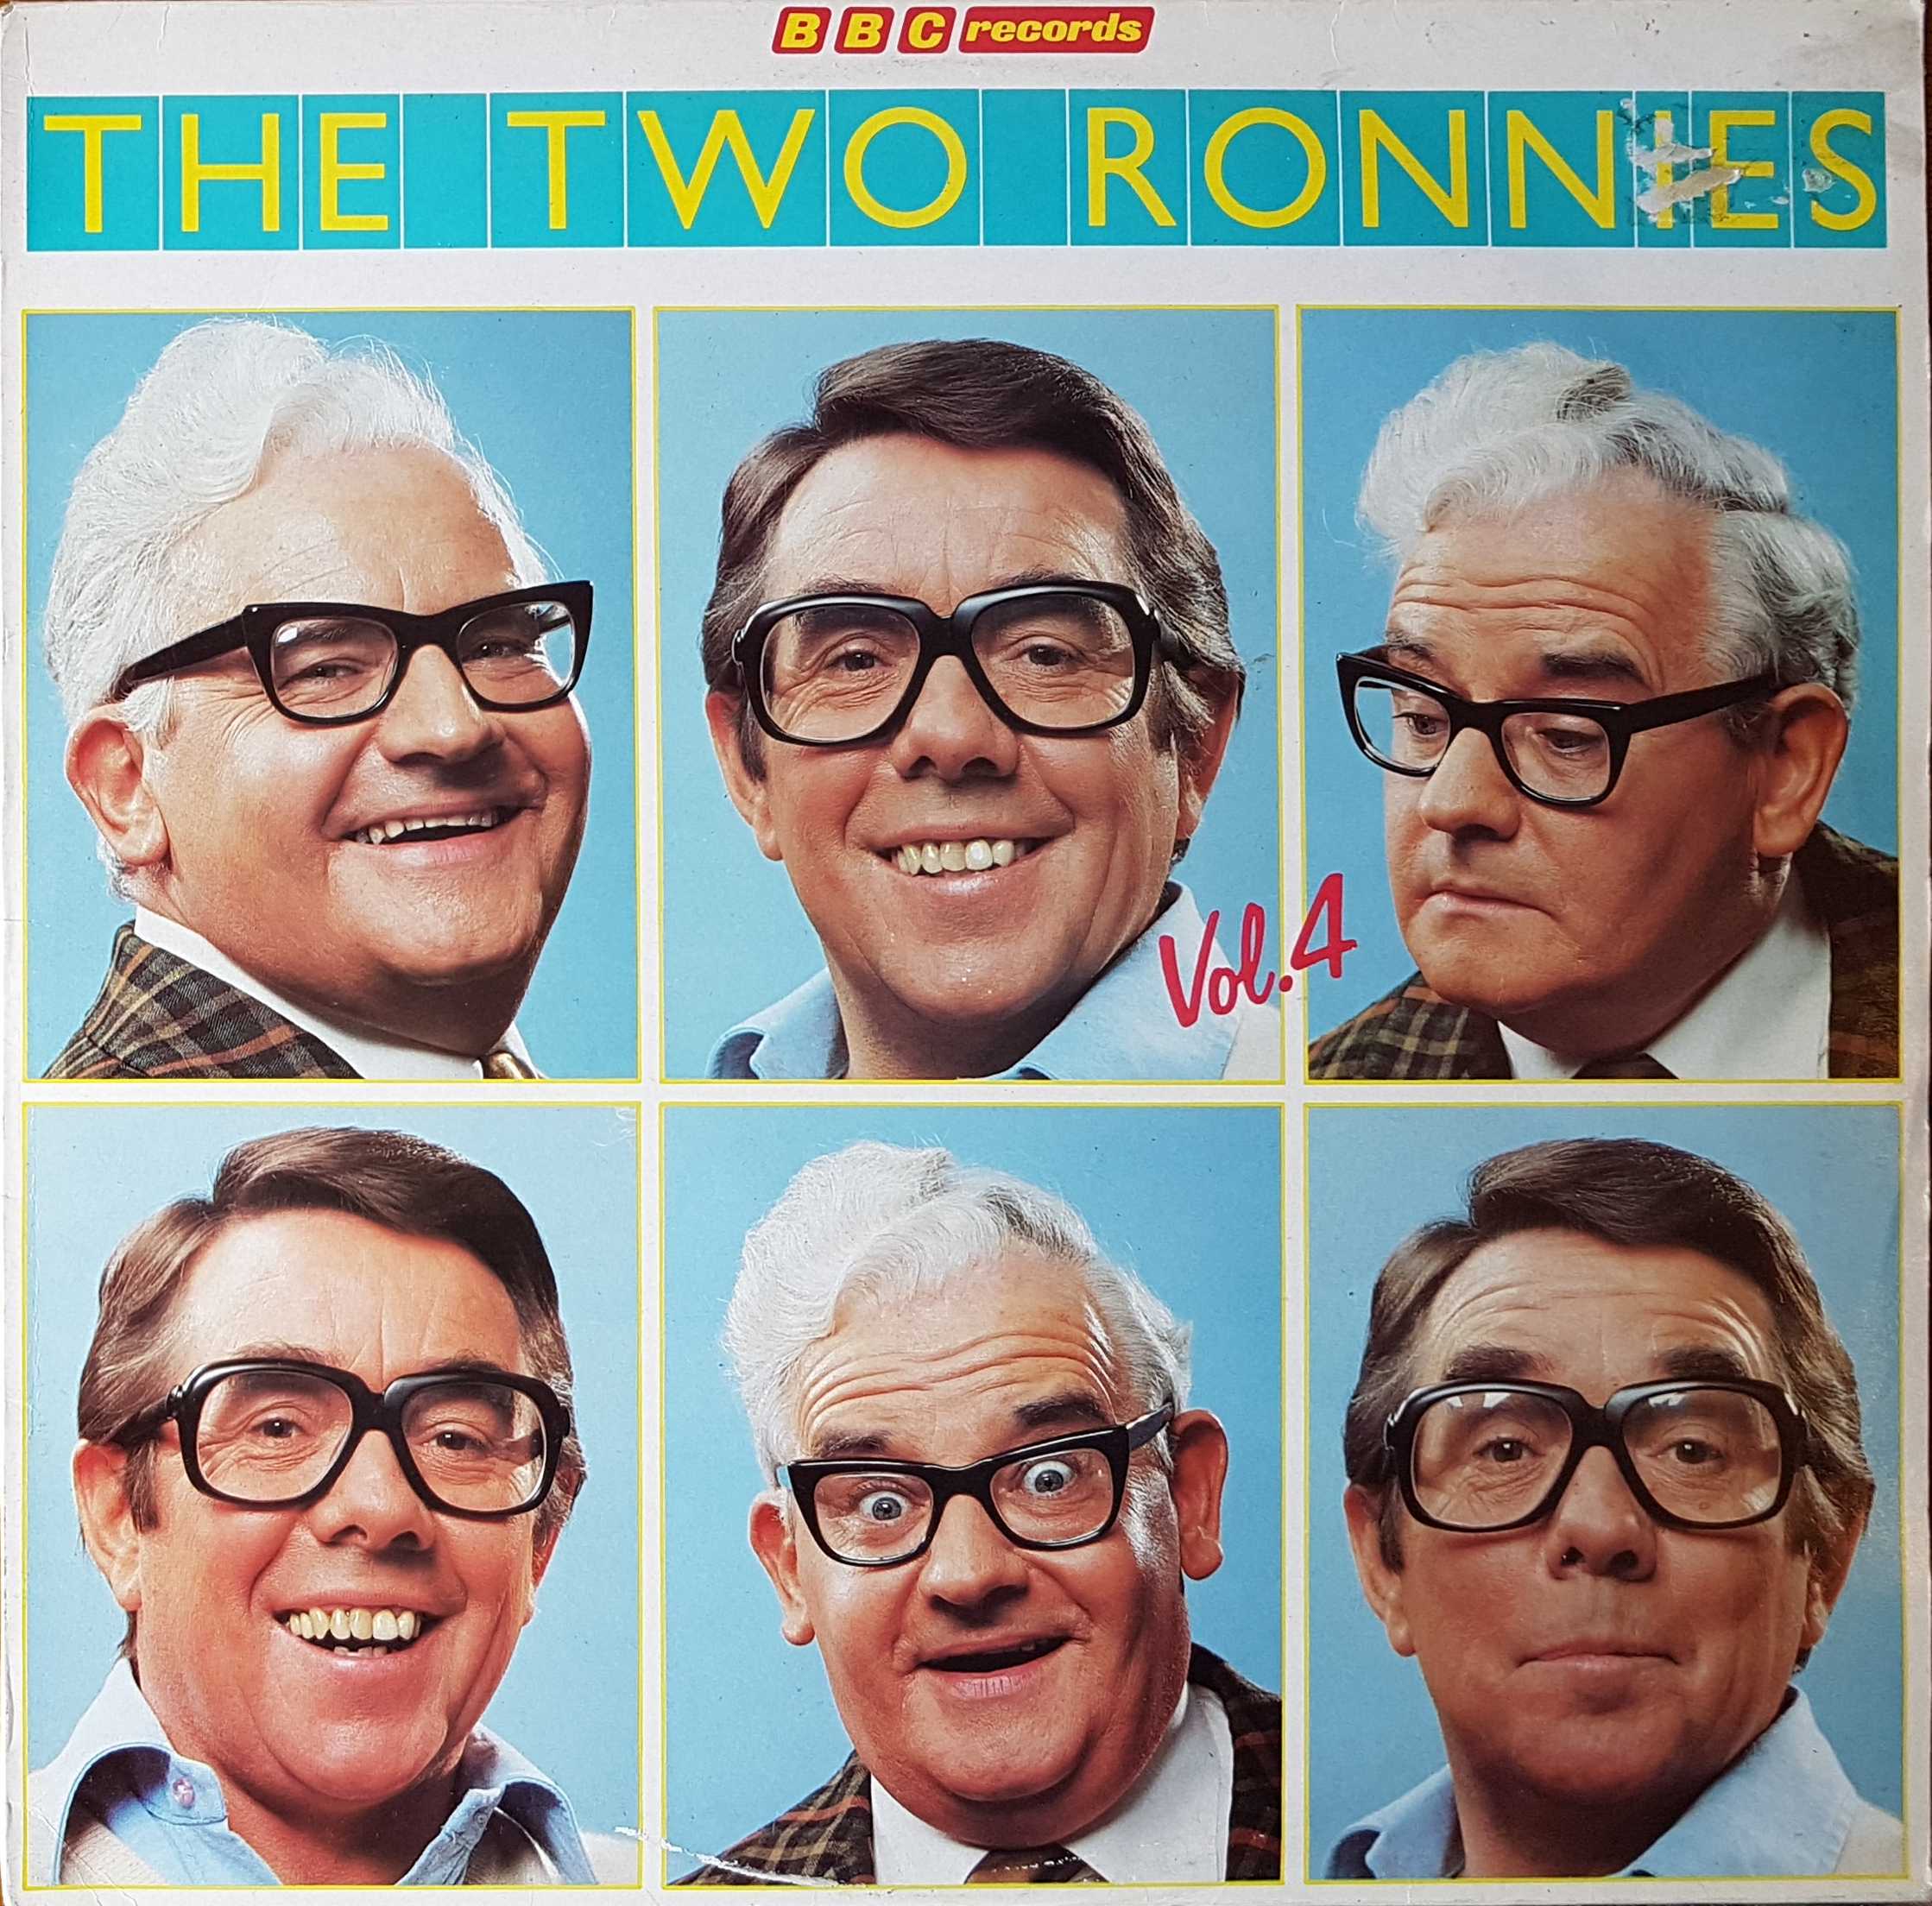 Picture of REB 393 The two Ronnies - Volume 4 by artist Various from the BBC albums - Records and Tapes library